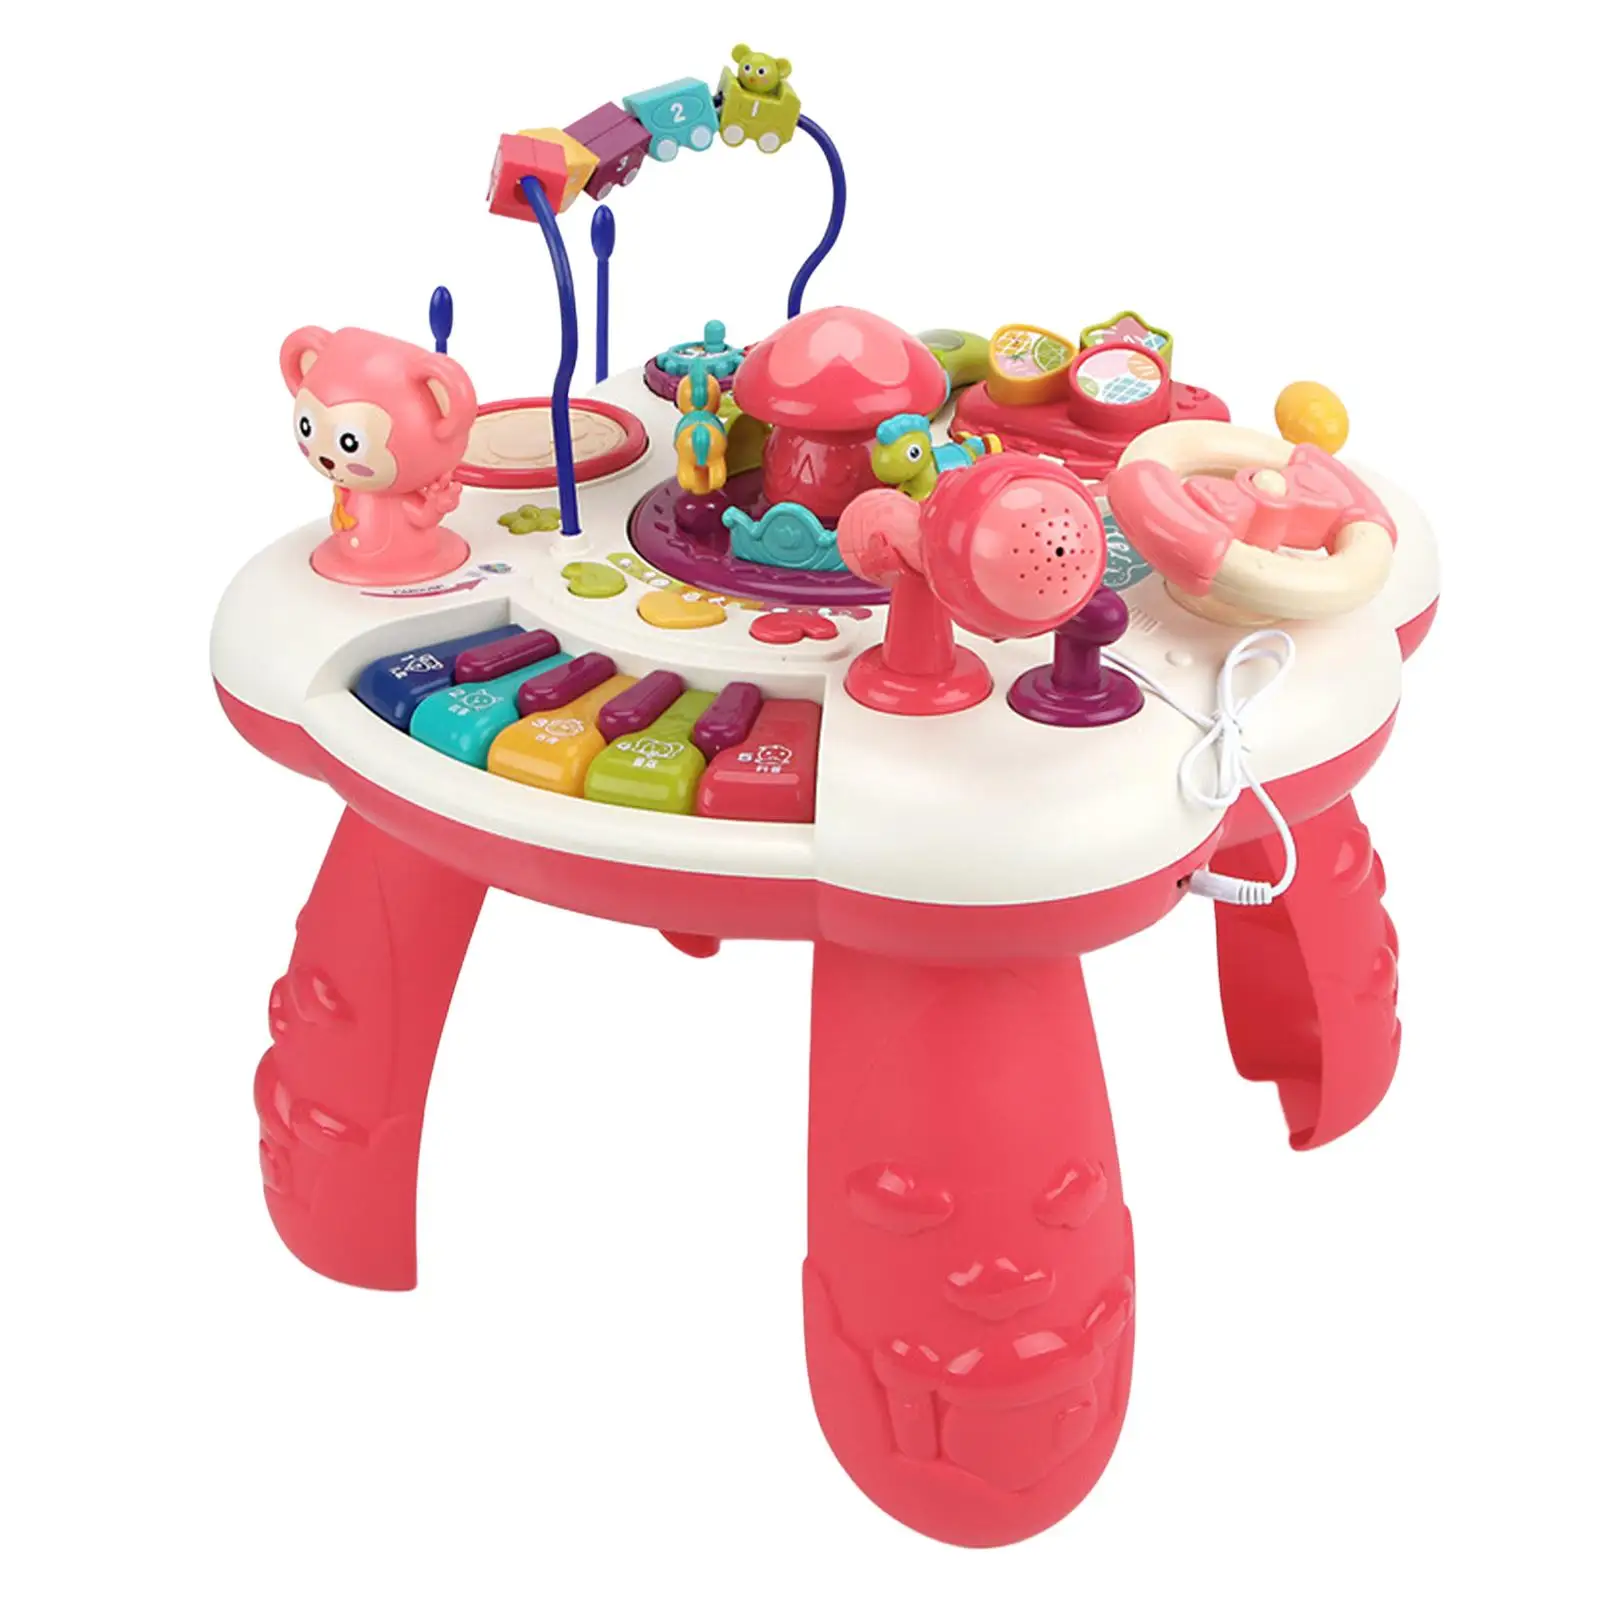 Musical Learning Activity Table Sensory Sound Toy Games with Light for Infants